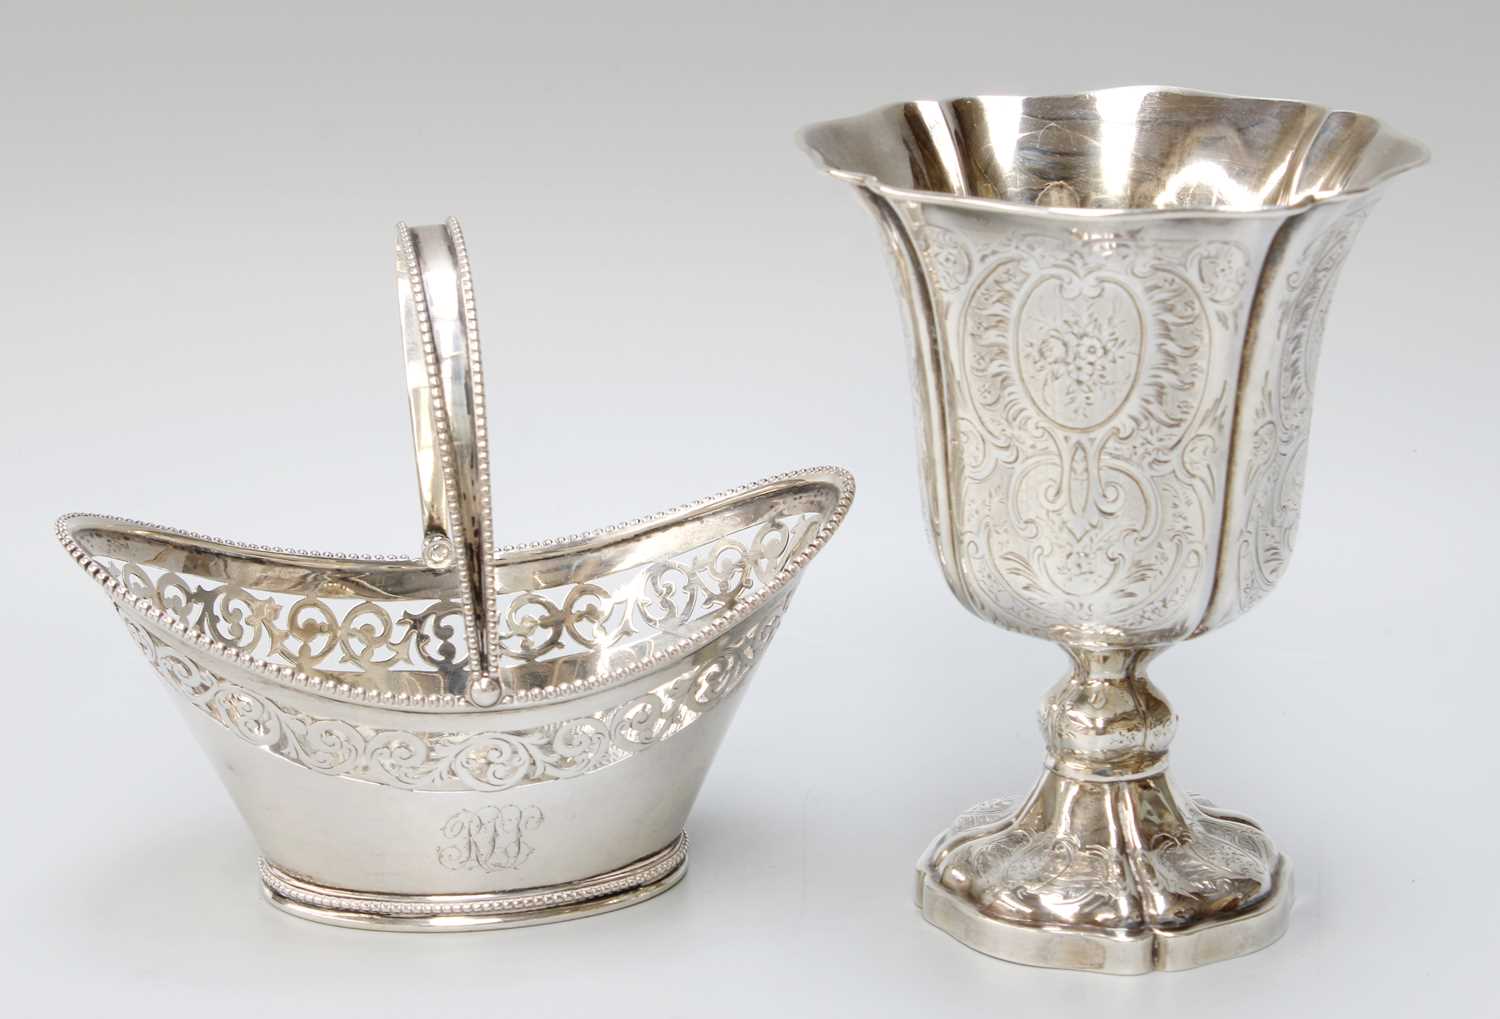 A French Silver Beaker, Maker's Mark Rubbed, Mid 19th Century, tapering cylindrical and on spreading